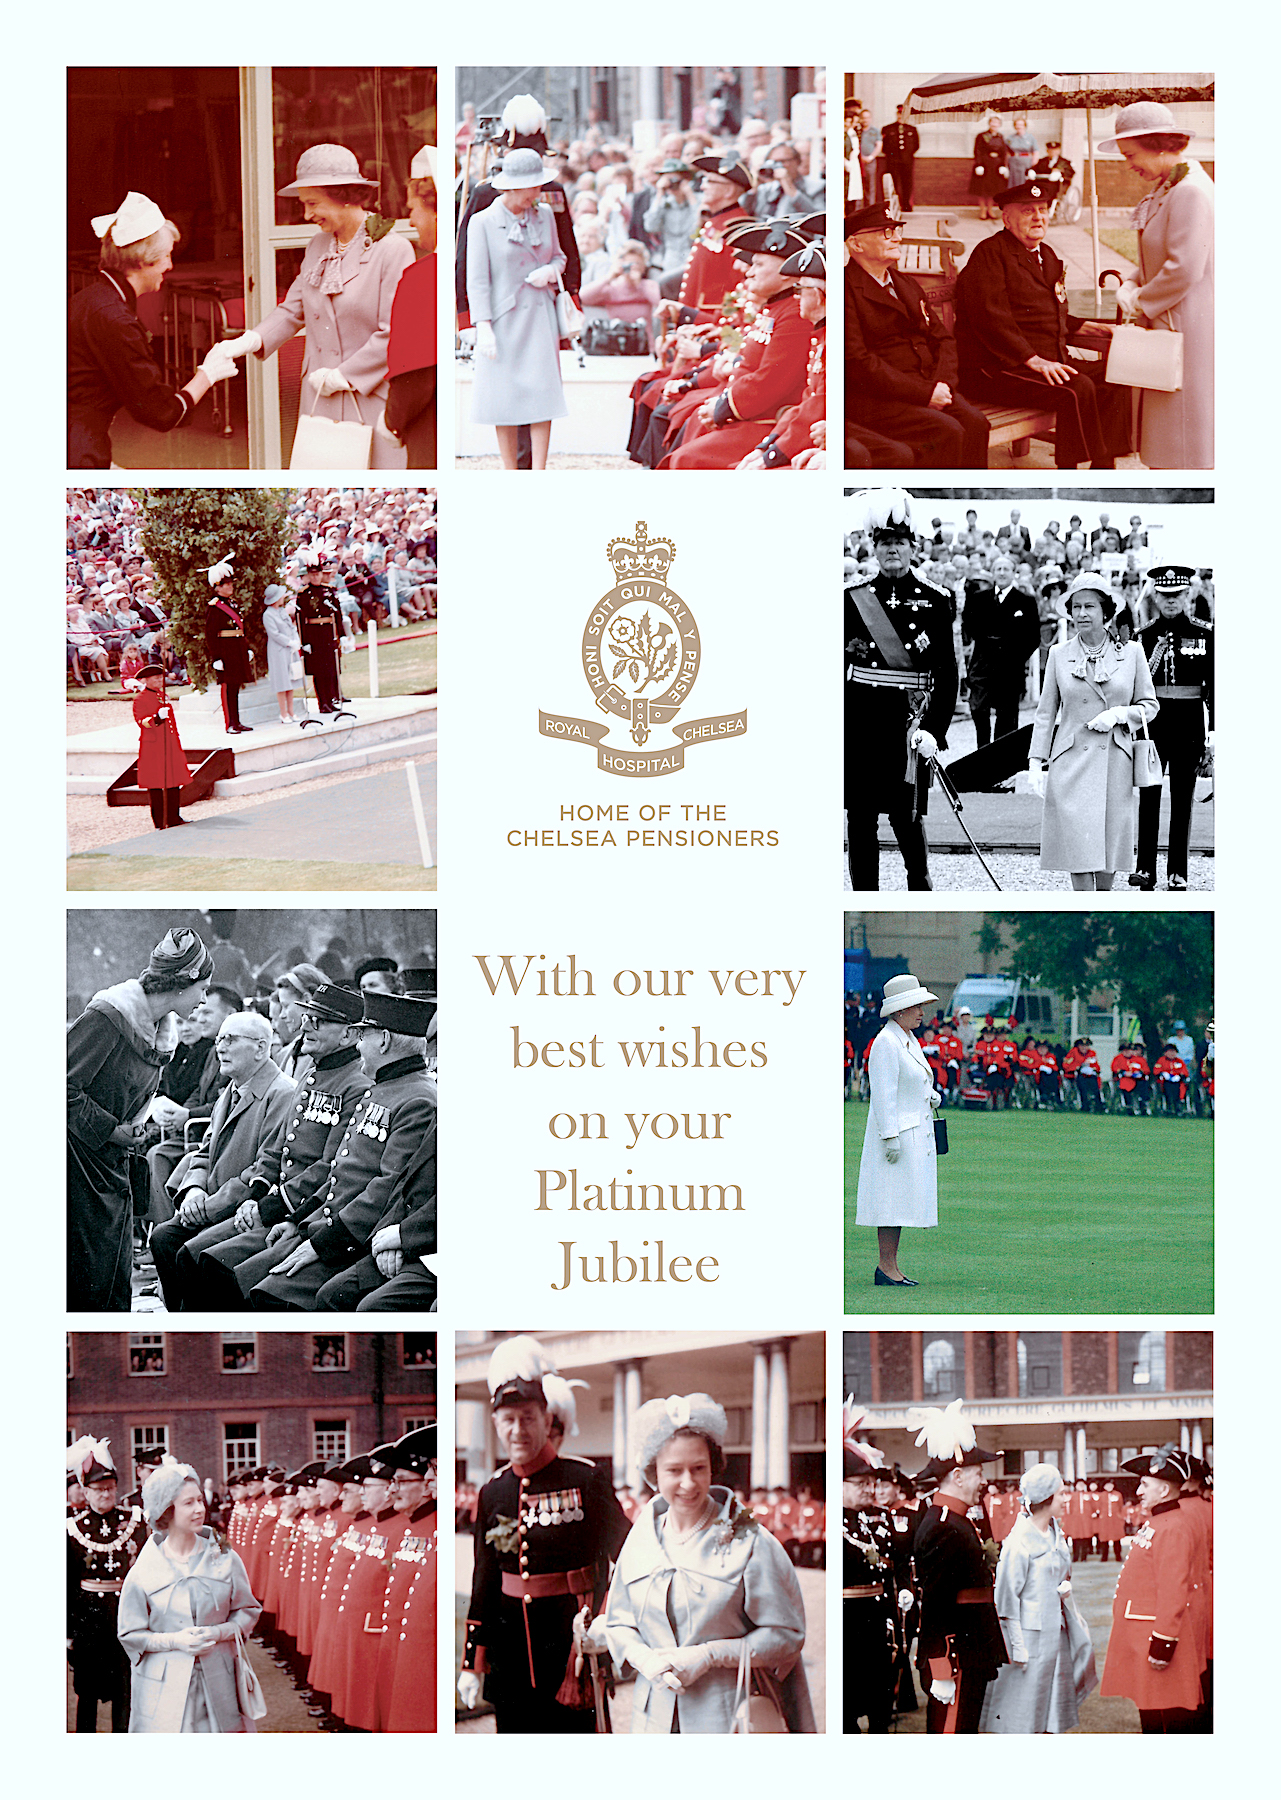 Platinum Jubilee Card from the Chelsea Pensioners to Her Majesty The Queen